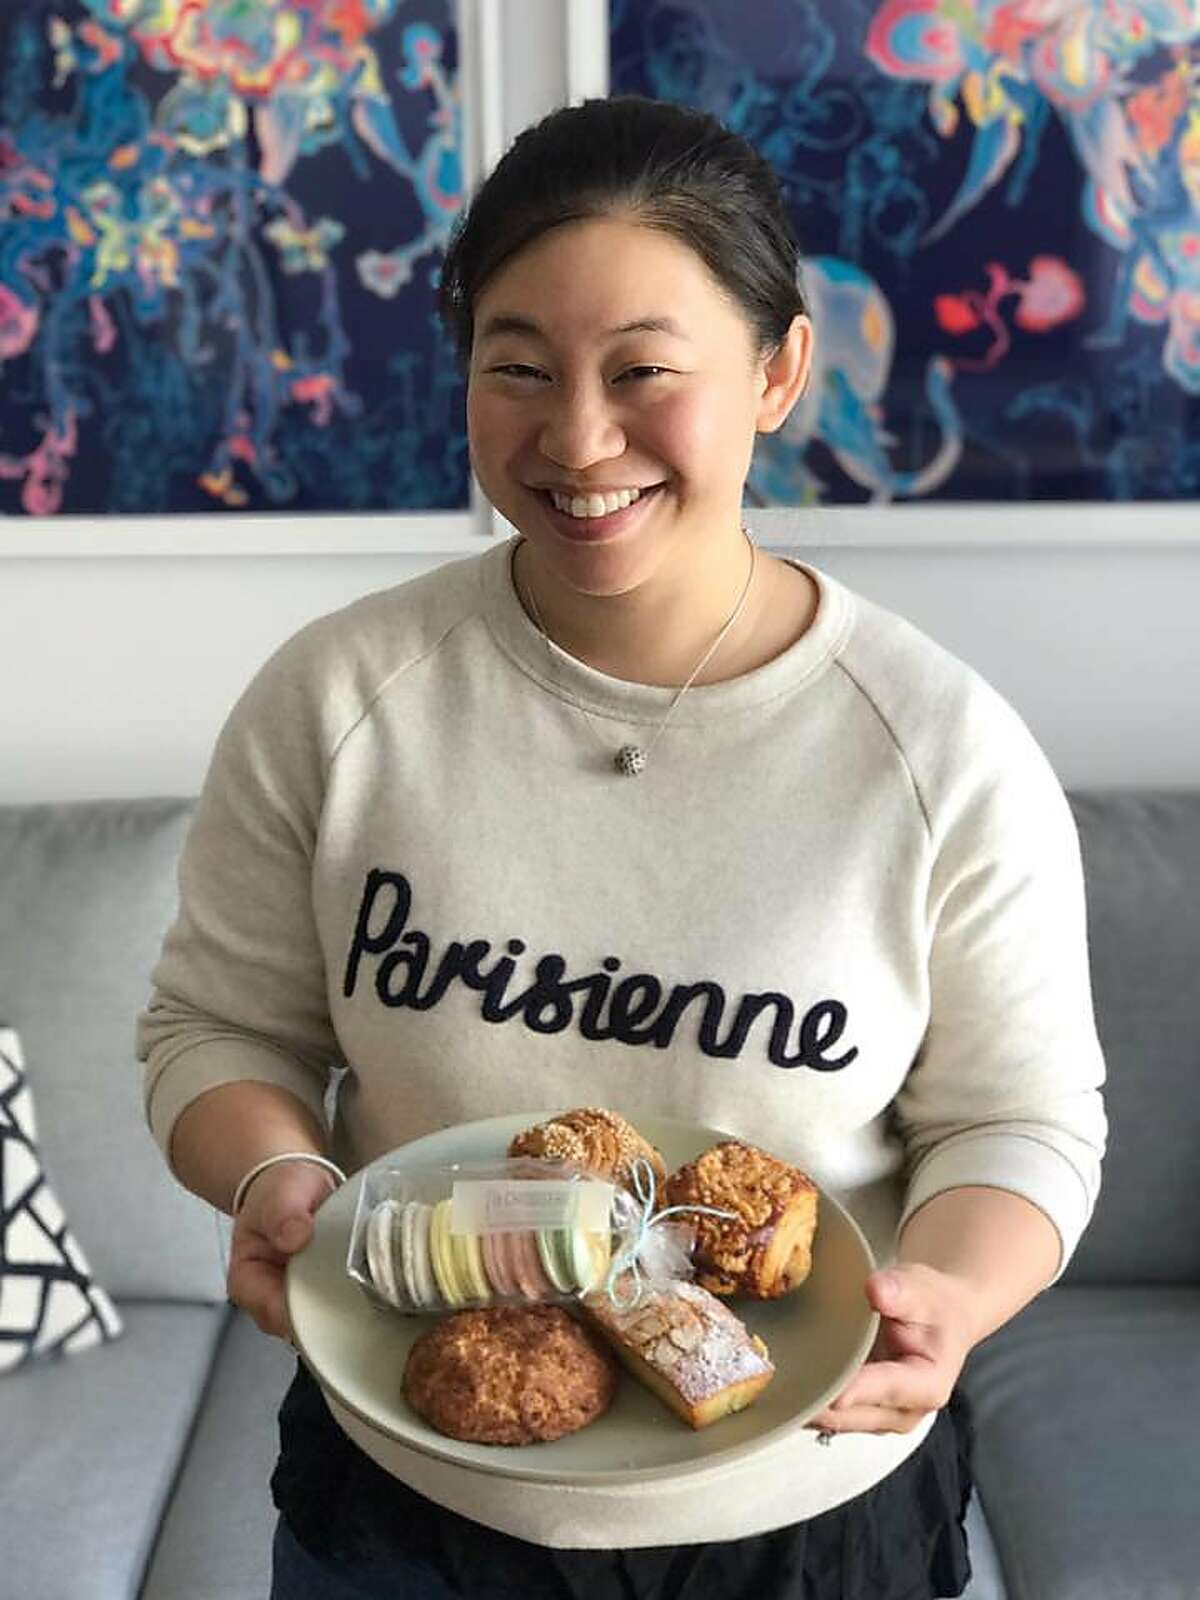 La Chinoiserie owner Joyce Tang bakes pastries that reflect both French and Chinese flavors